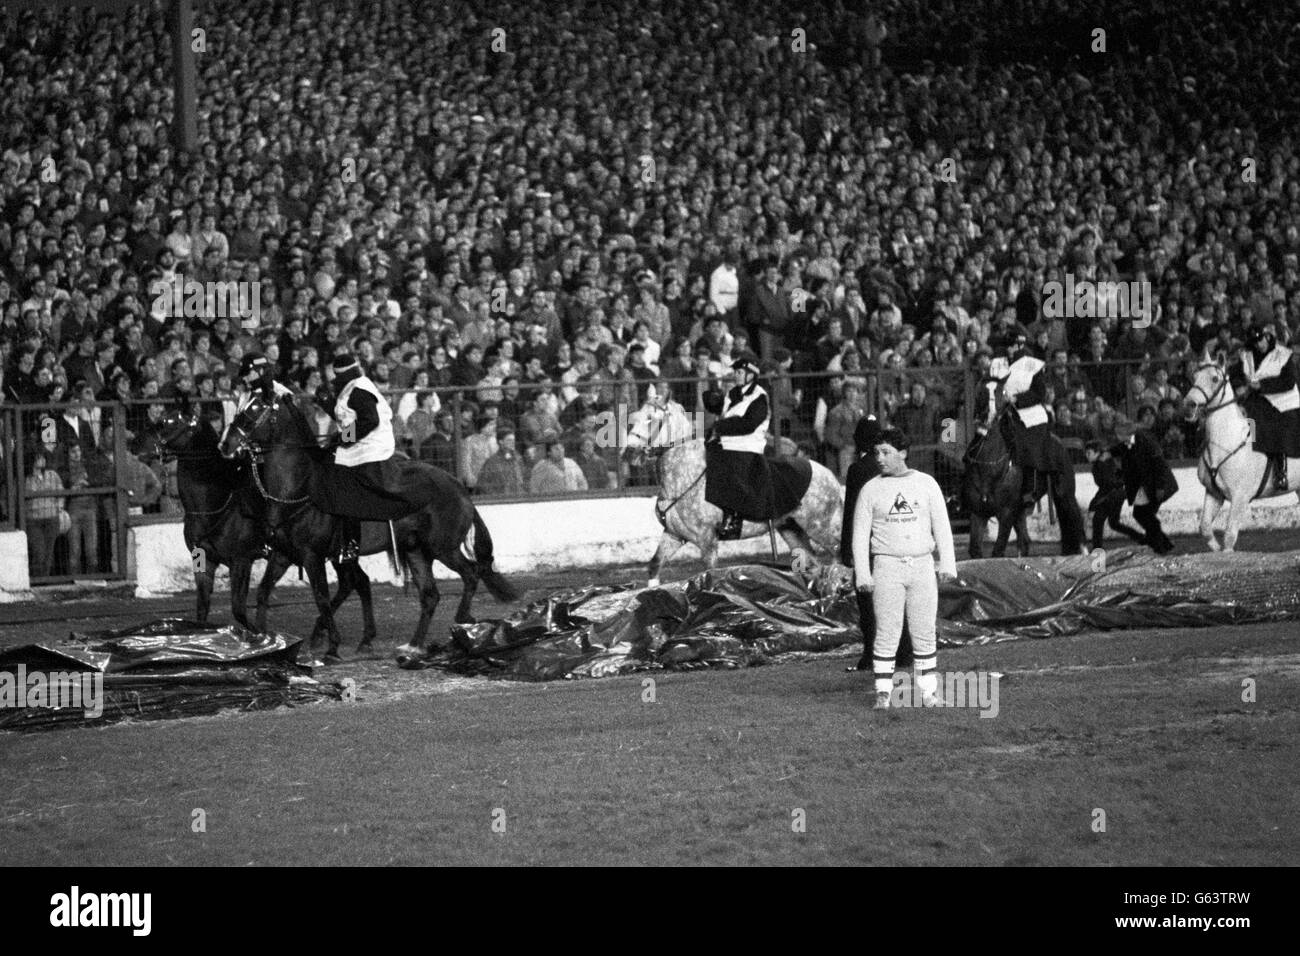 Chelsea fans invade the pitch during Chelsea versus Sunderland Milk Cup semi-final, second leg game at Stamford Bridge, London, where Sunderland won 3-2. The game was held up for six minutes because of pitch invasions. Mounted police are shown trying to bring order to the pitch. Six policemen were injured and 23 other people taken to hospital, and approximately 100 arrested. Stock Photo